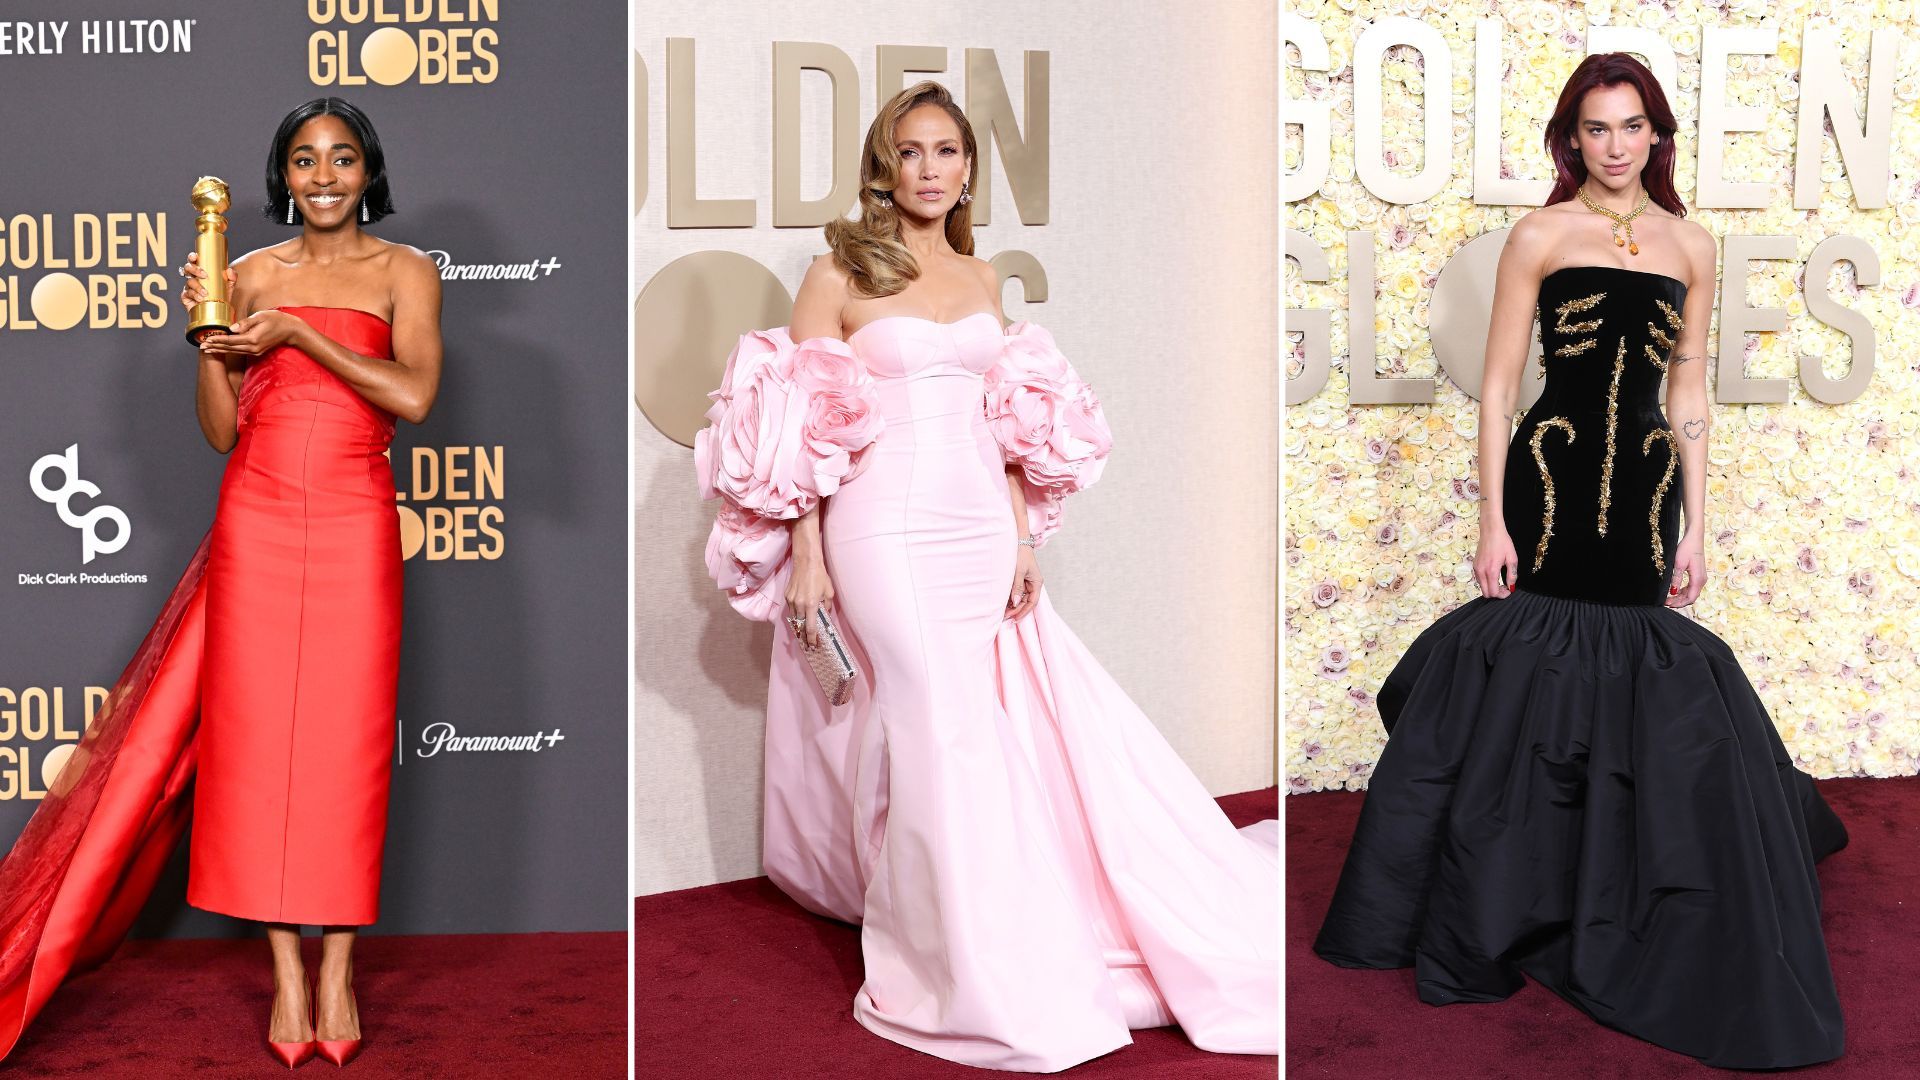 5 fashion trends that dominated the Golden Globes red carpet